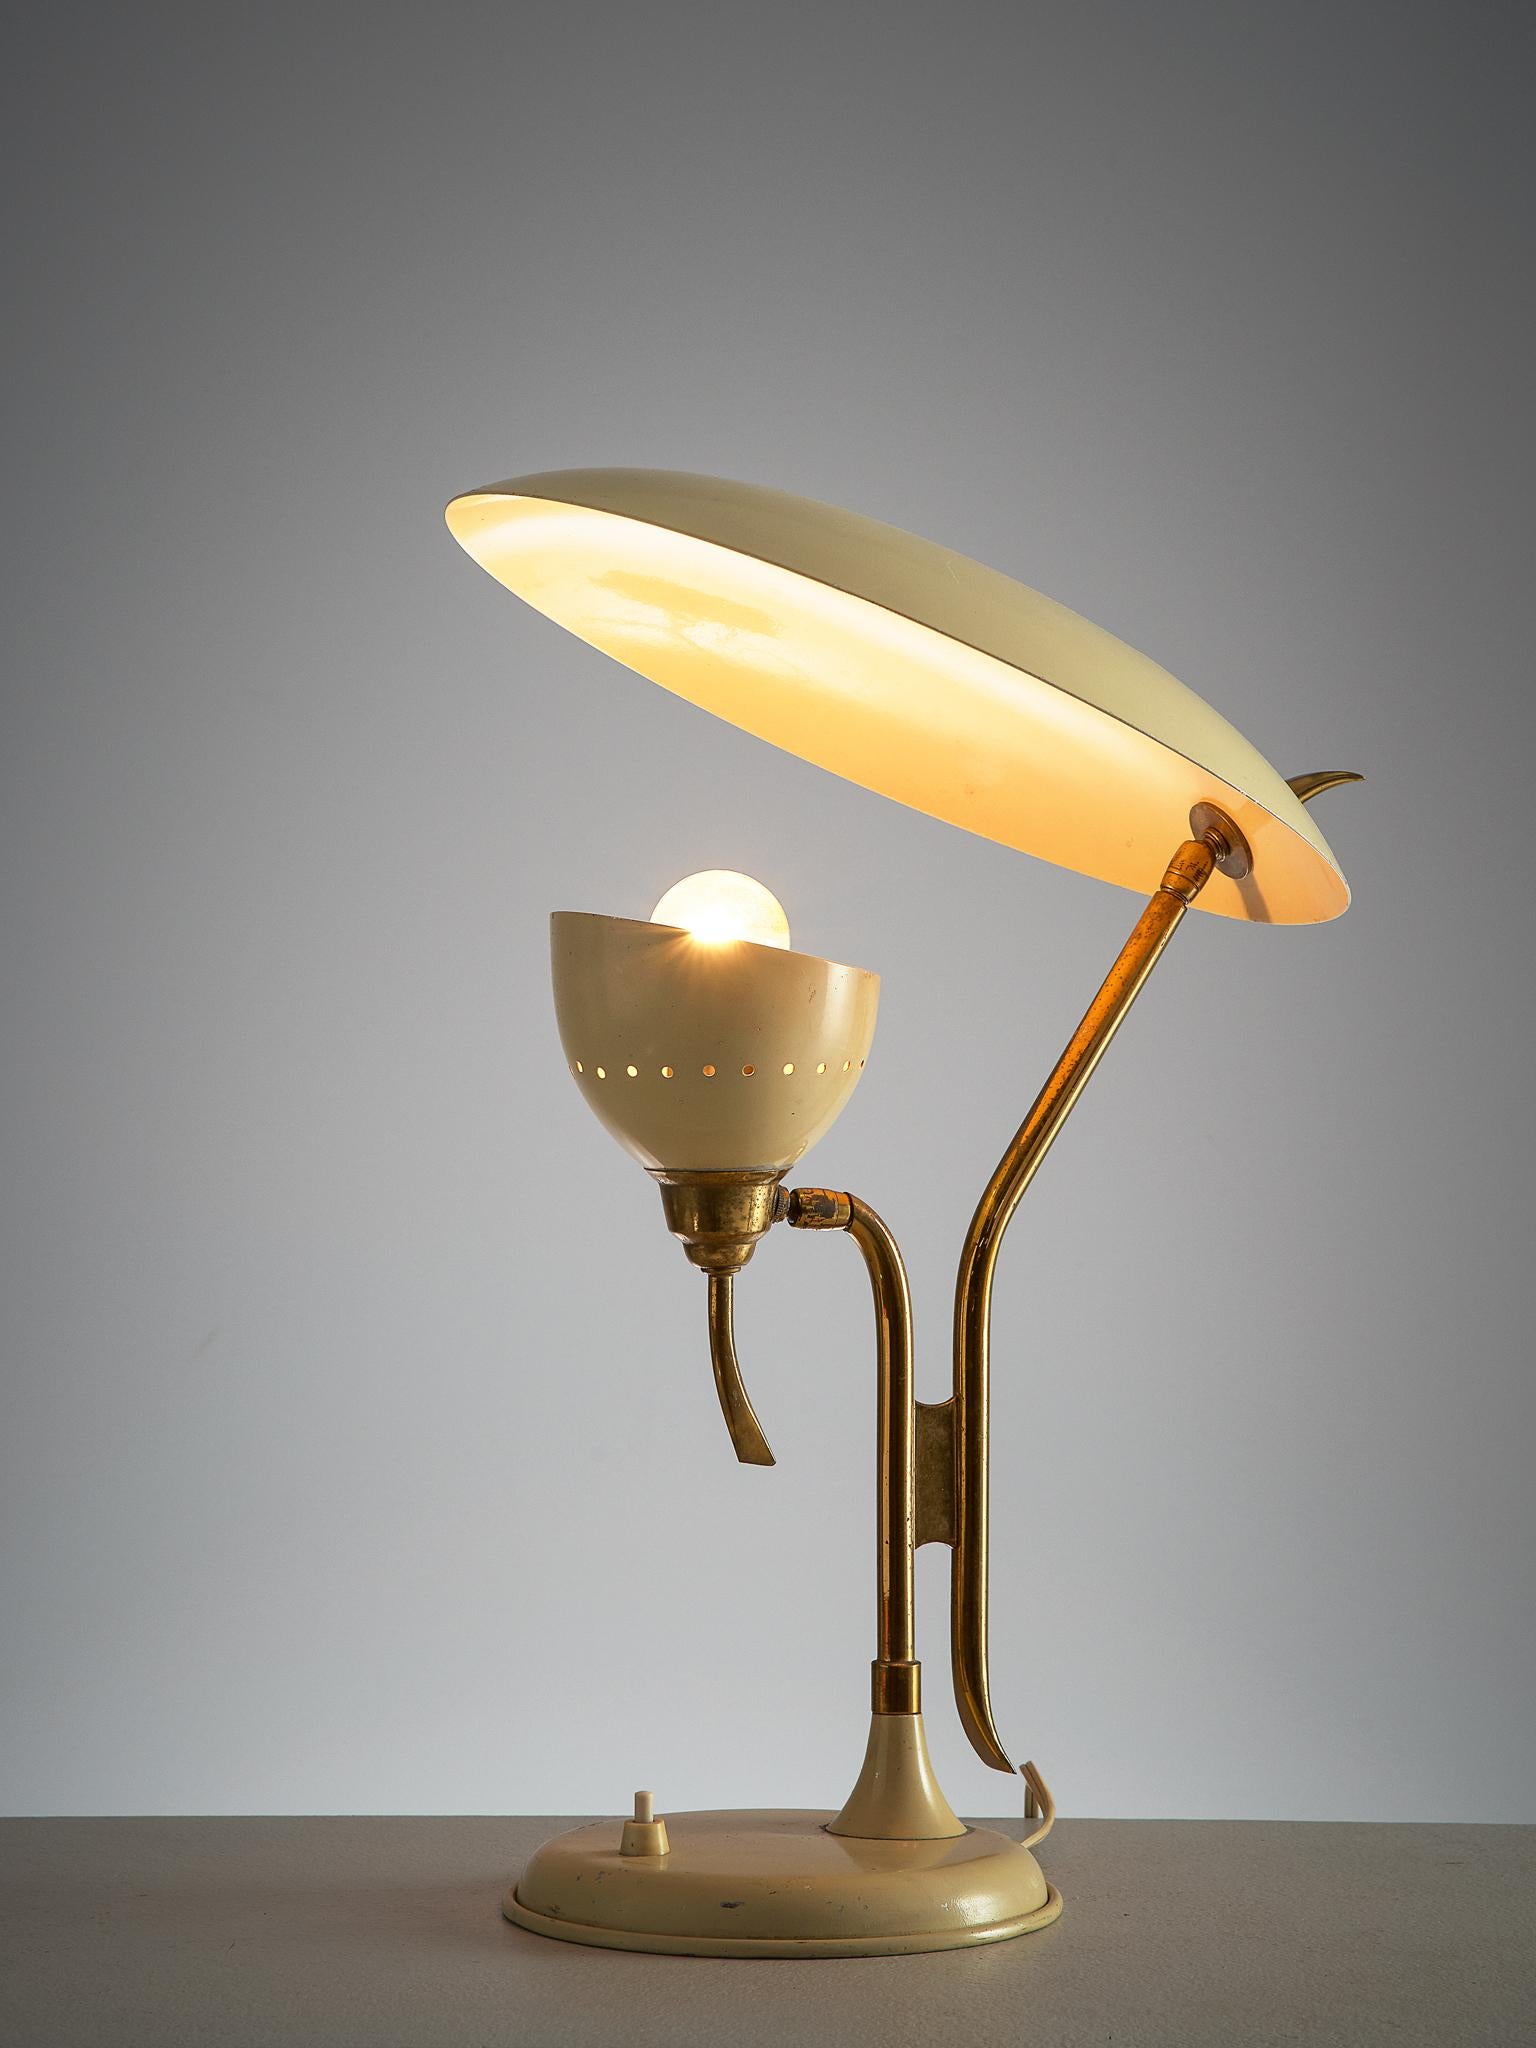 Lumen, table lamp, beige metal and brass, Italy, 1950s.

This 1950s adjustable beige desk light is manufactured by Lumen. The metal shade holding the lamp is directed upwards to another shade. This creates a beautiful diffuse light. Both shades